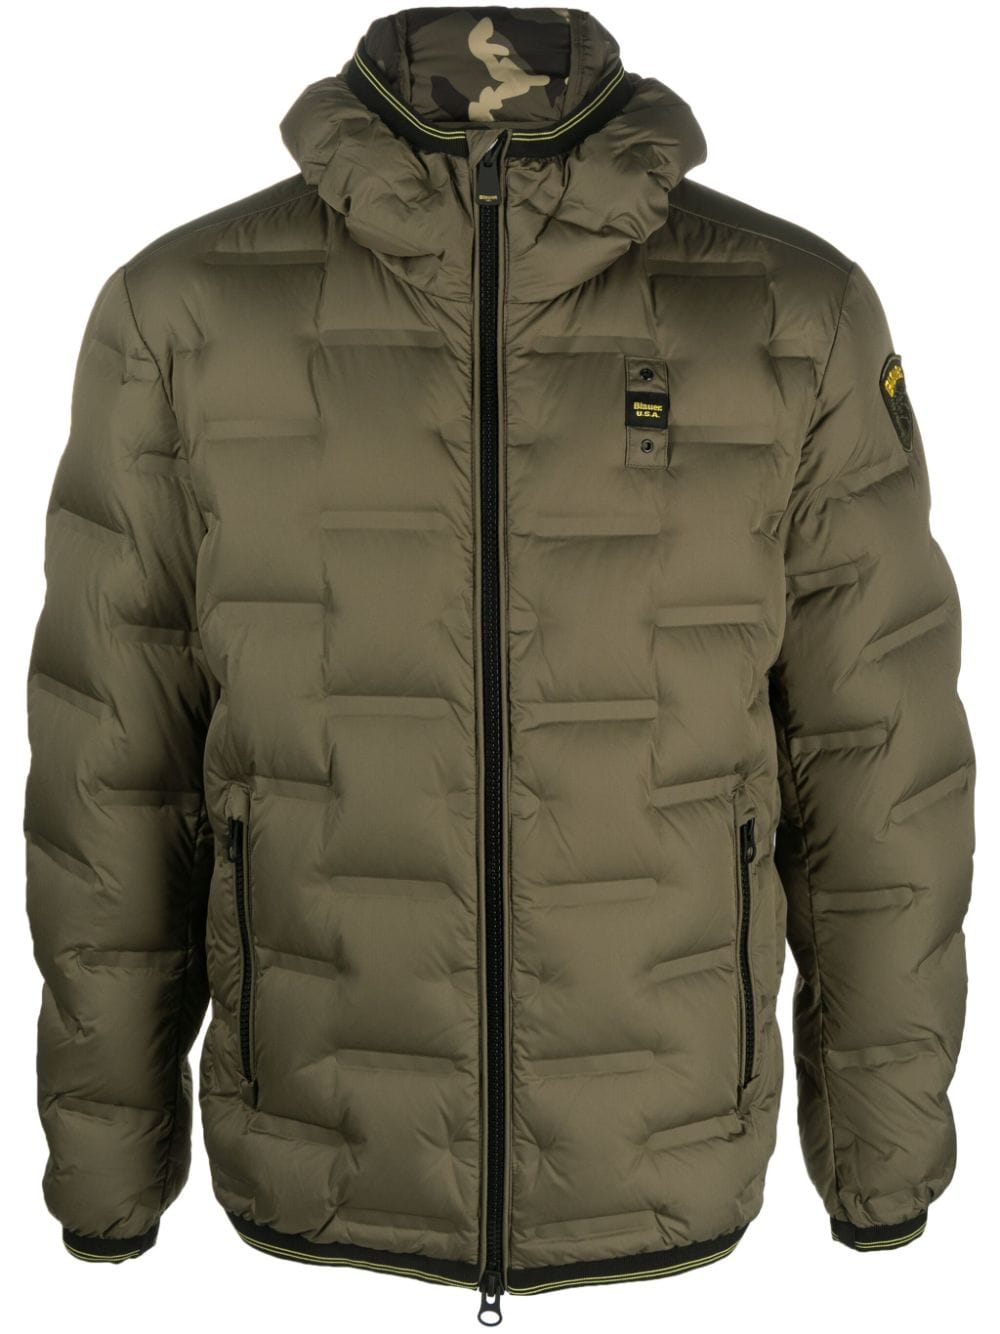 Barry hooded down jacket